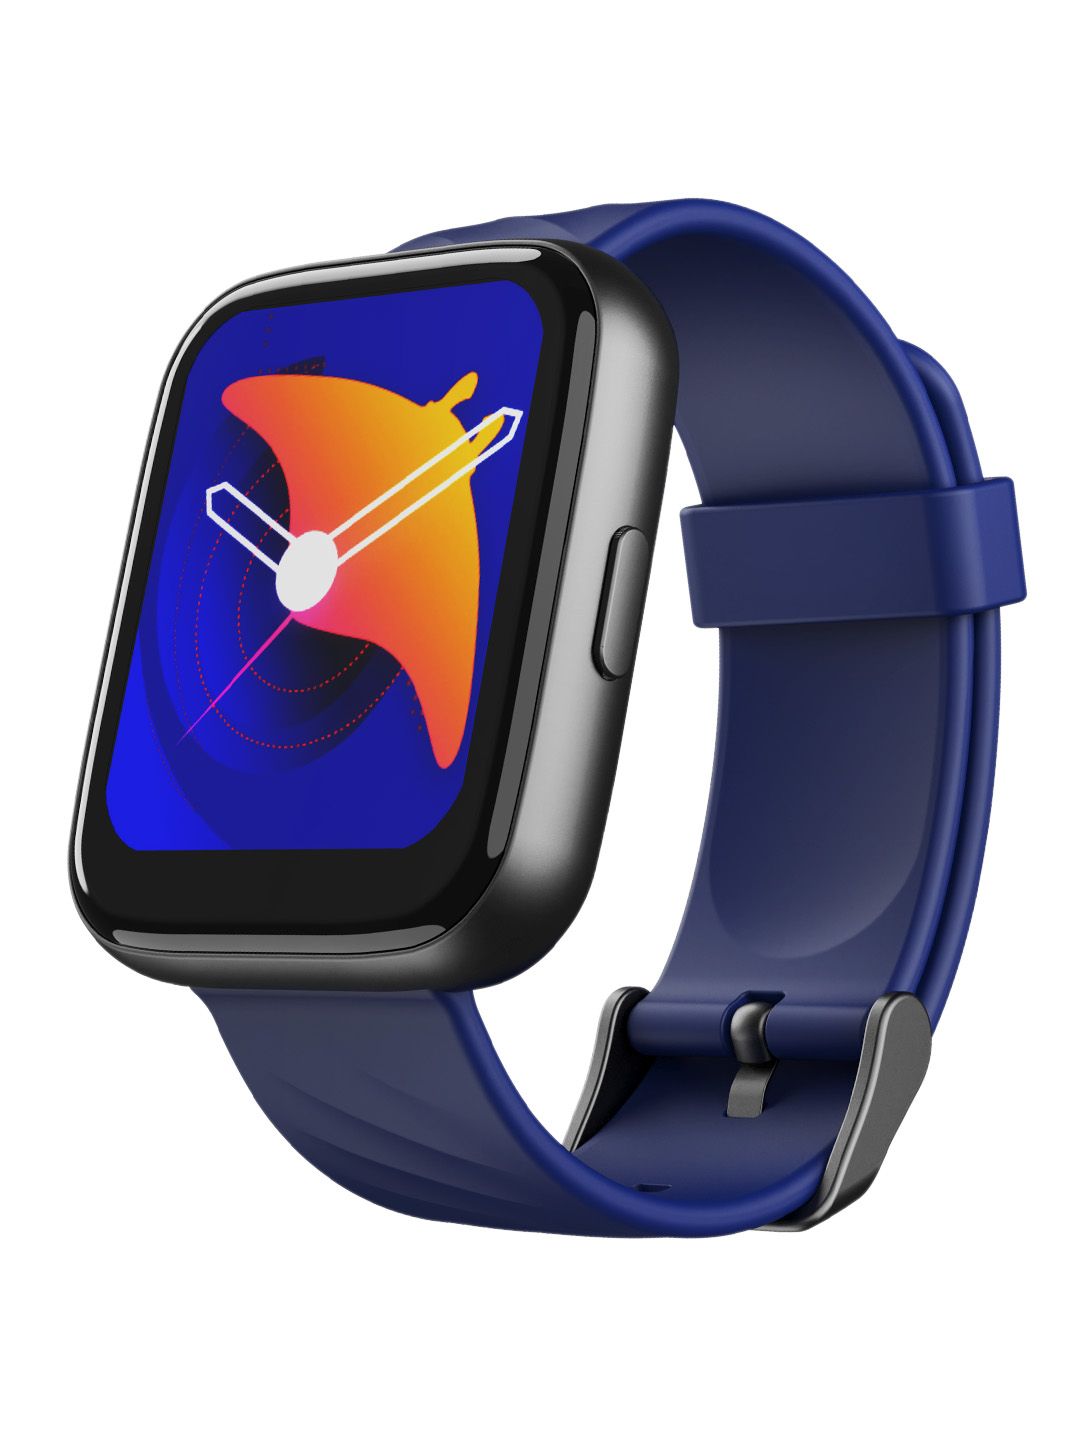 boAt Wave Pro 47 M Smart Watch - Deep Blue Price in India